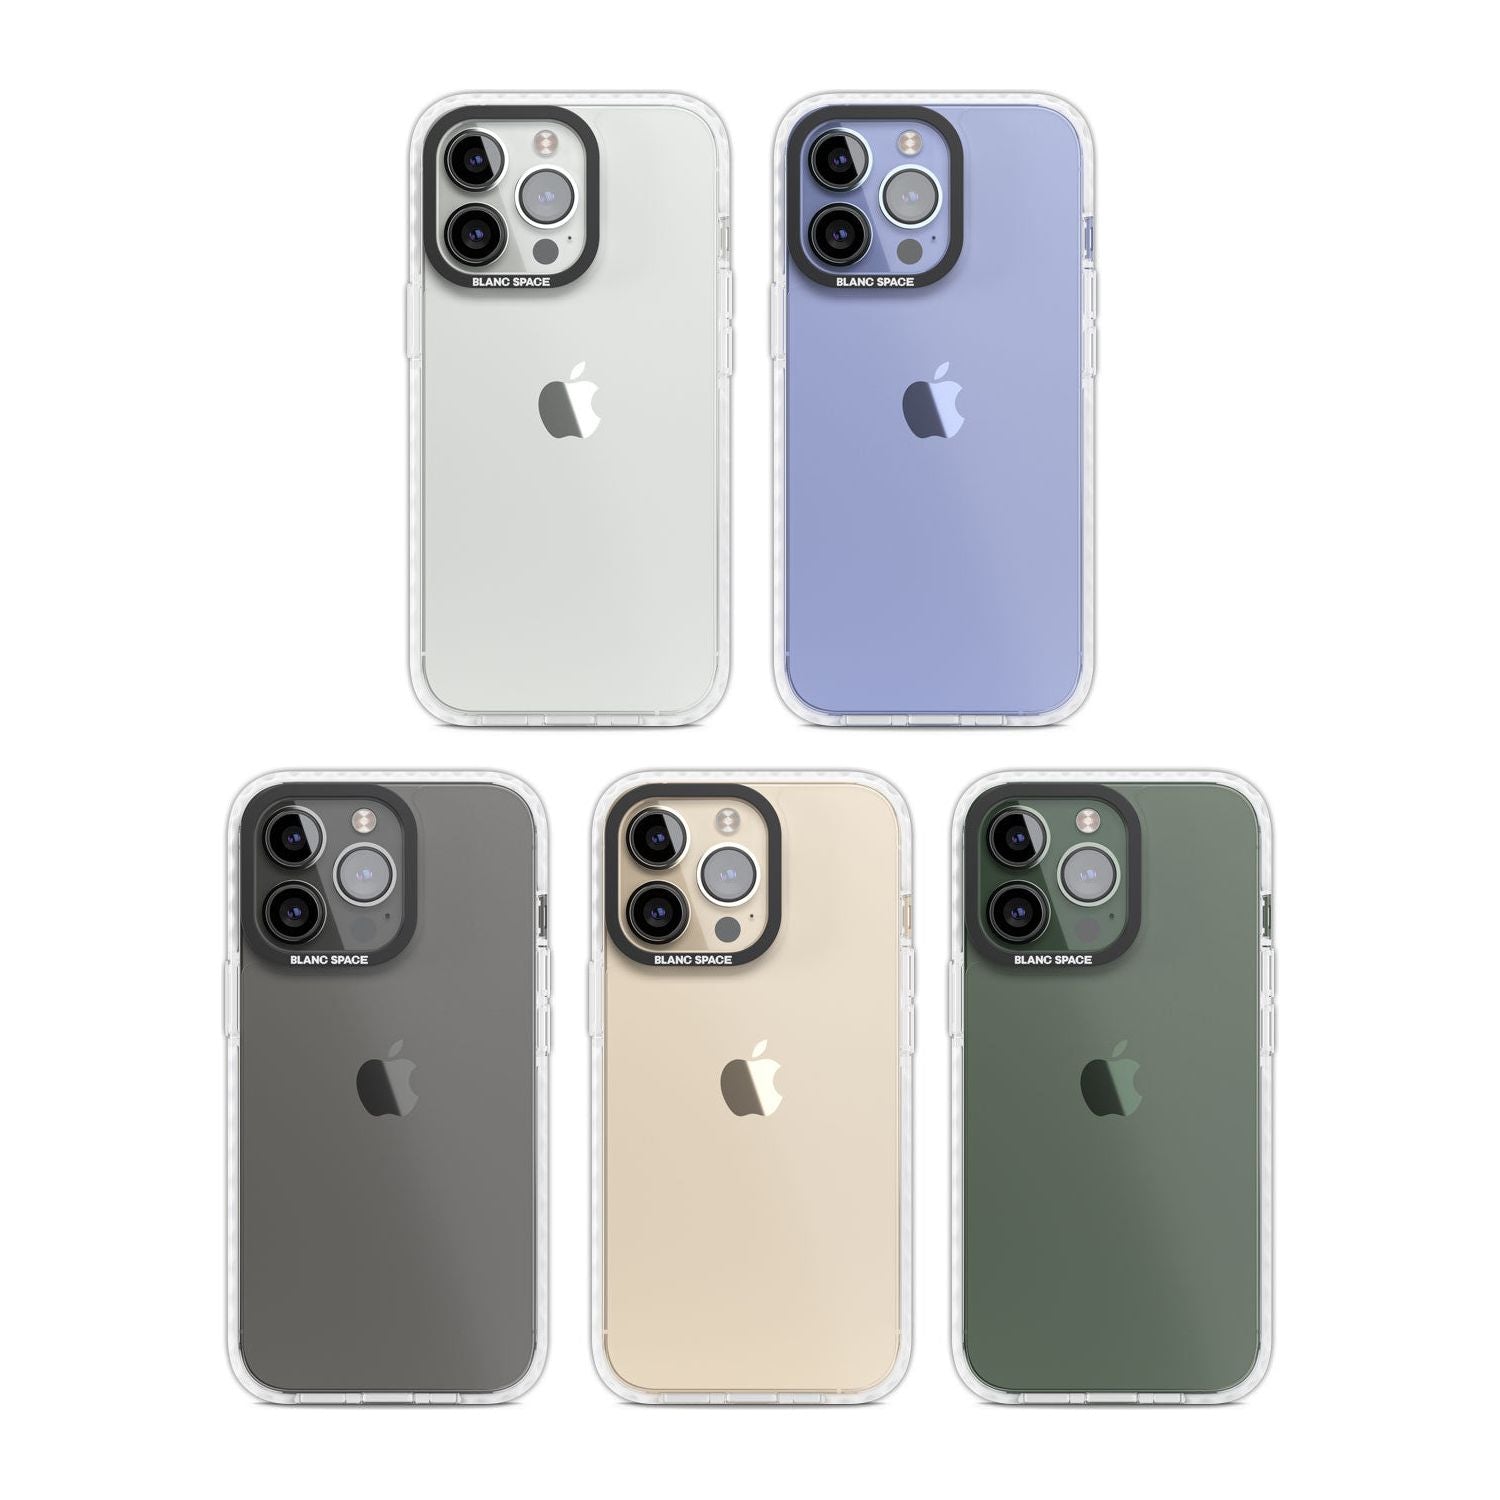 Clear Impact Phone Case iPhone 15 Pro Max / Impact Case,iPhone 15 Plus / Impact Case,iPhone 15 Pro / Impact Case,iPhone 15 / Impact Case,iPhone 14 Pro Max / Impact Case,iPhone 14 Plus / Impact Case,iPhone 14 Pro / Impact Case,iPhone 14 / Impact Case,iPhone 13 Pro Max / Impact Case,iPhone 13 Pro / Impact Case,iPhone 13 / Impact Case,iPhone 13 Mini / Impact Case,iPhone 12 Pro Max / Impact Case,iPhone 12 Pro / Impact Case,iPhone 12 / Impact Case,iPhone 12 Mini / Impact Case,iPhone 11 / Impact Case,iPhone 11 Pr